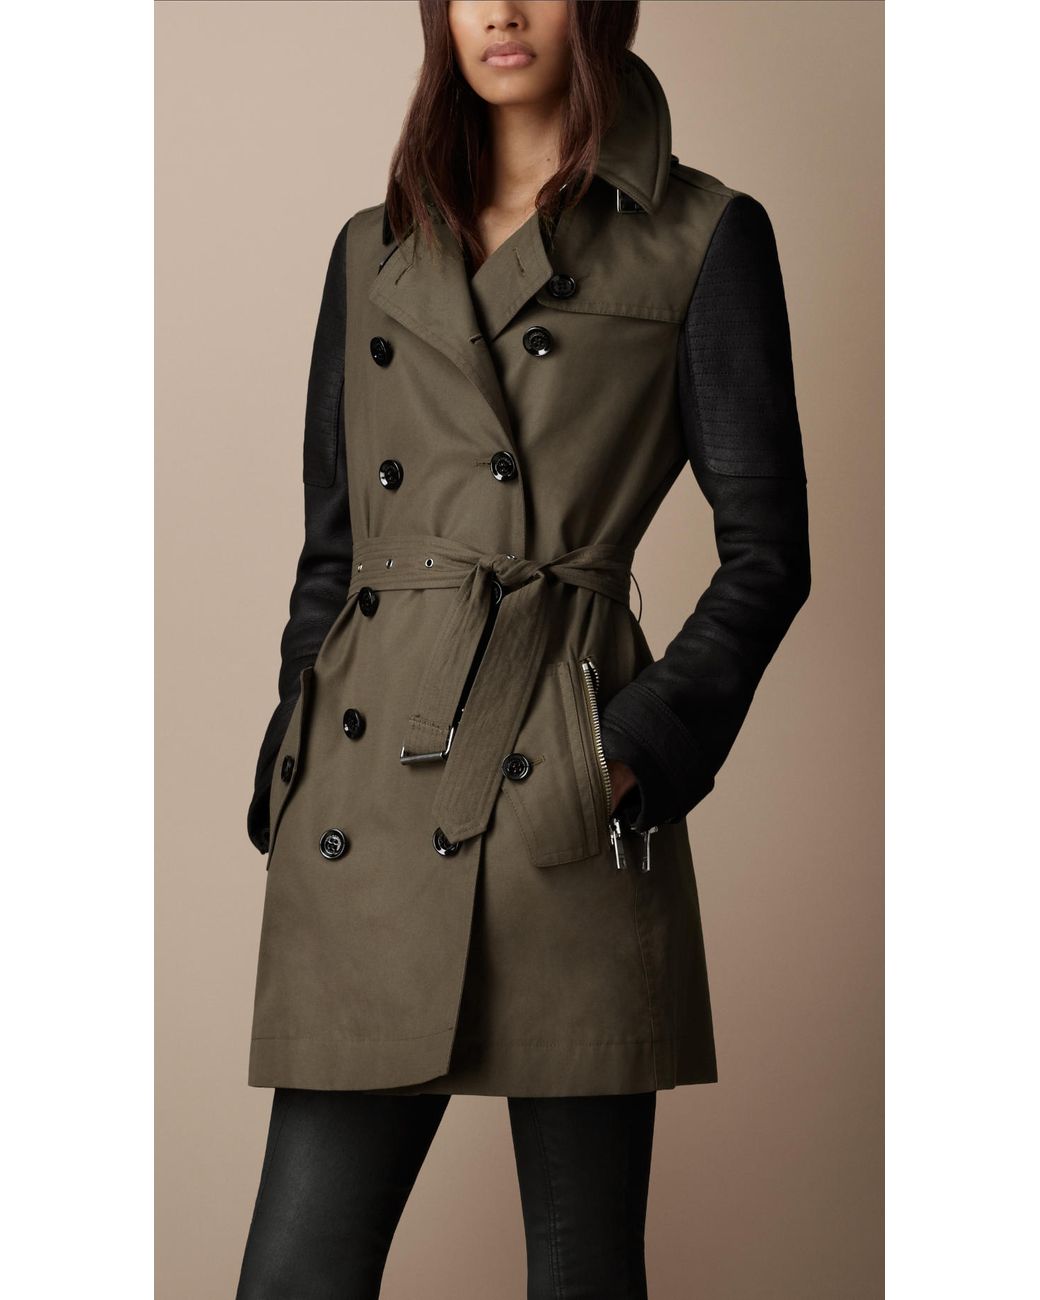 Burberry Brit Short Leather Sleeve Cotton Trench Coat in Green | Lyst